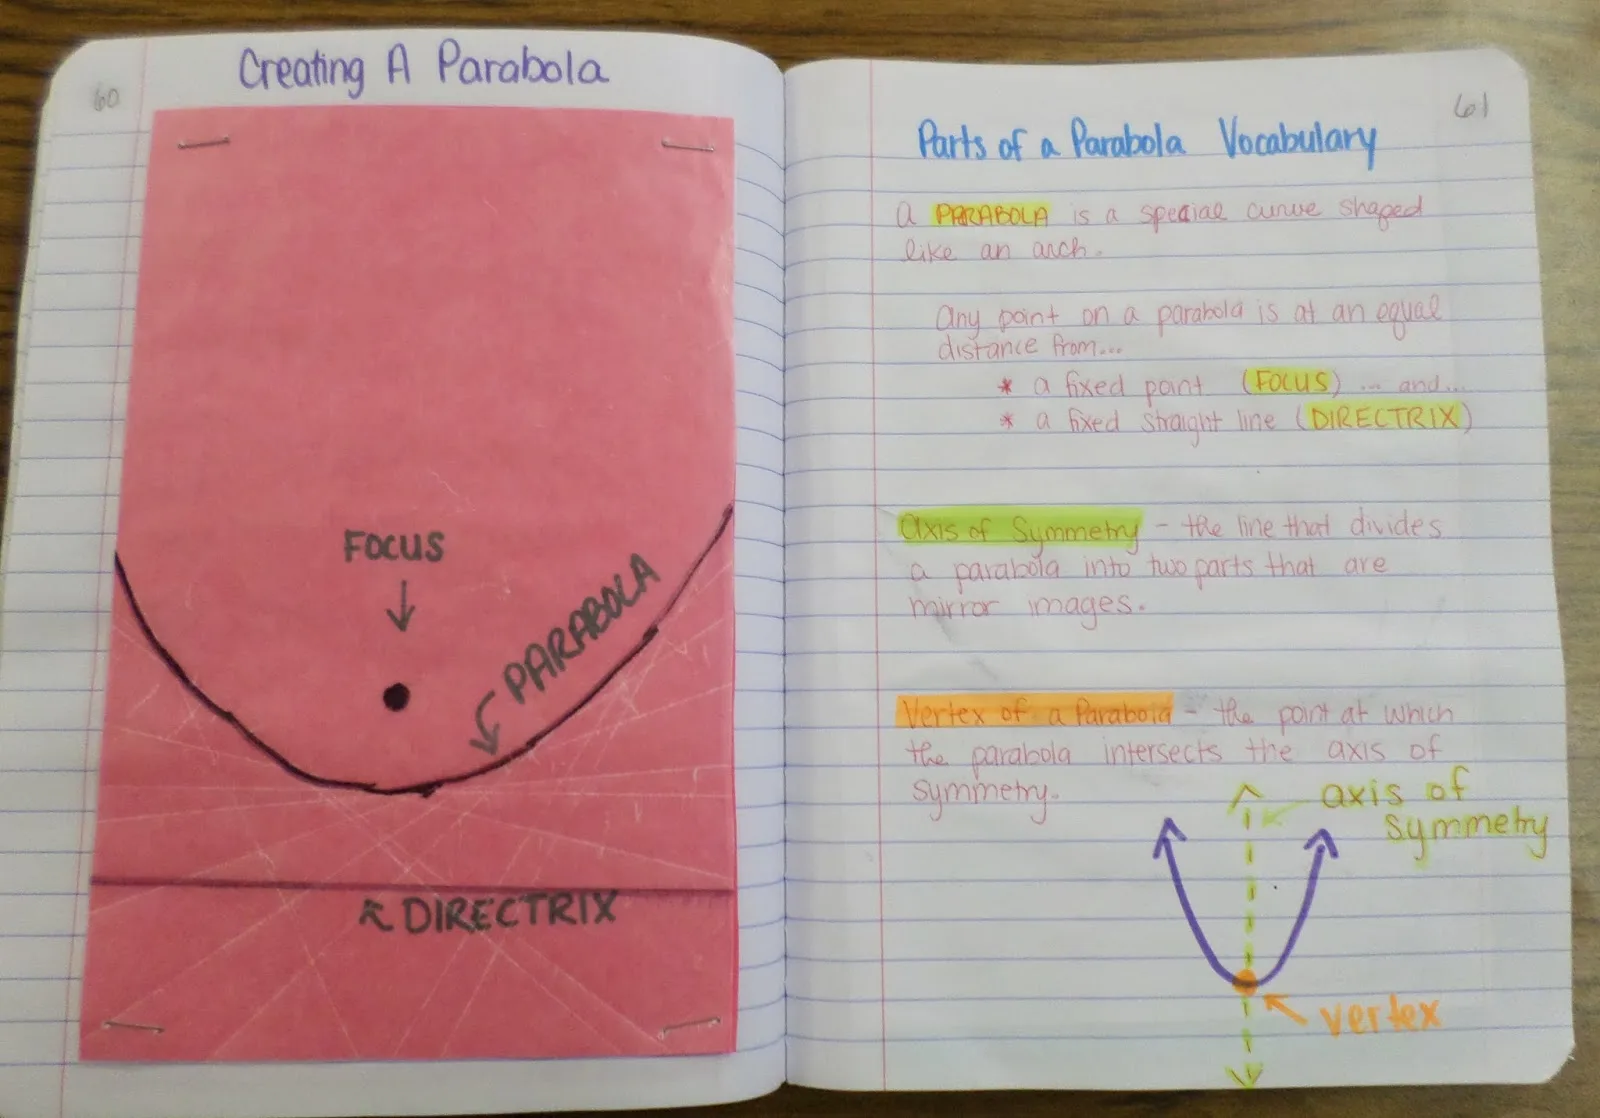 Wax Paper Parabola Activity in Interactive Notebook with Focus and Directrix Labeled. 